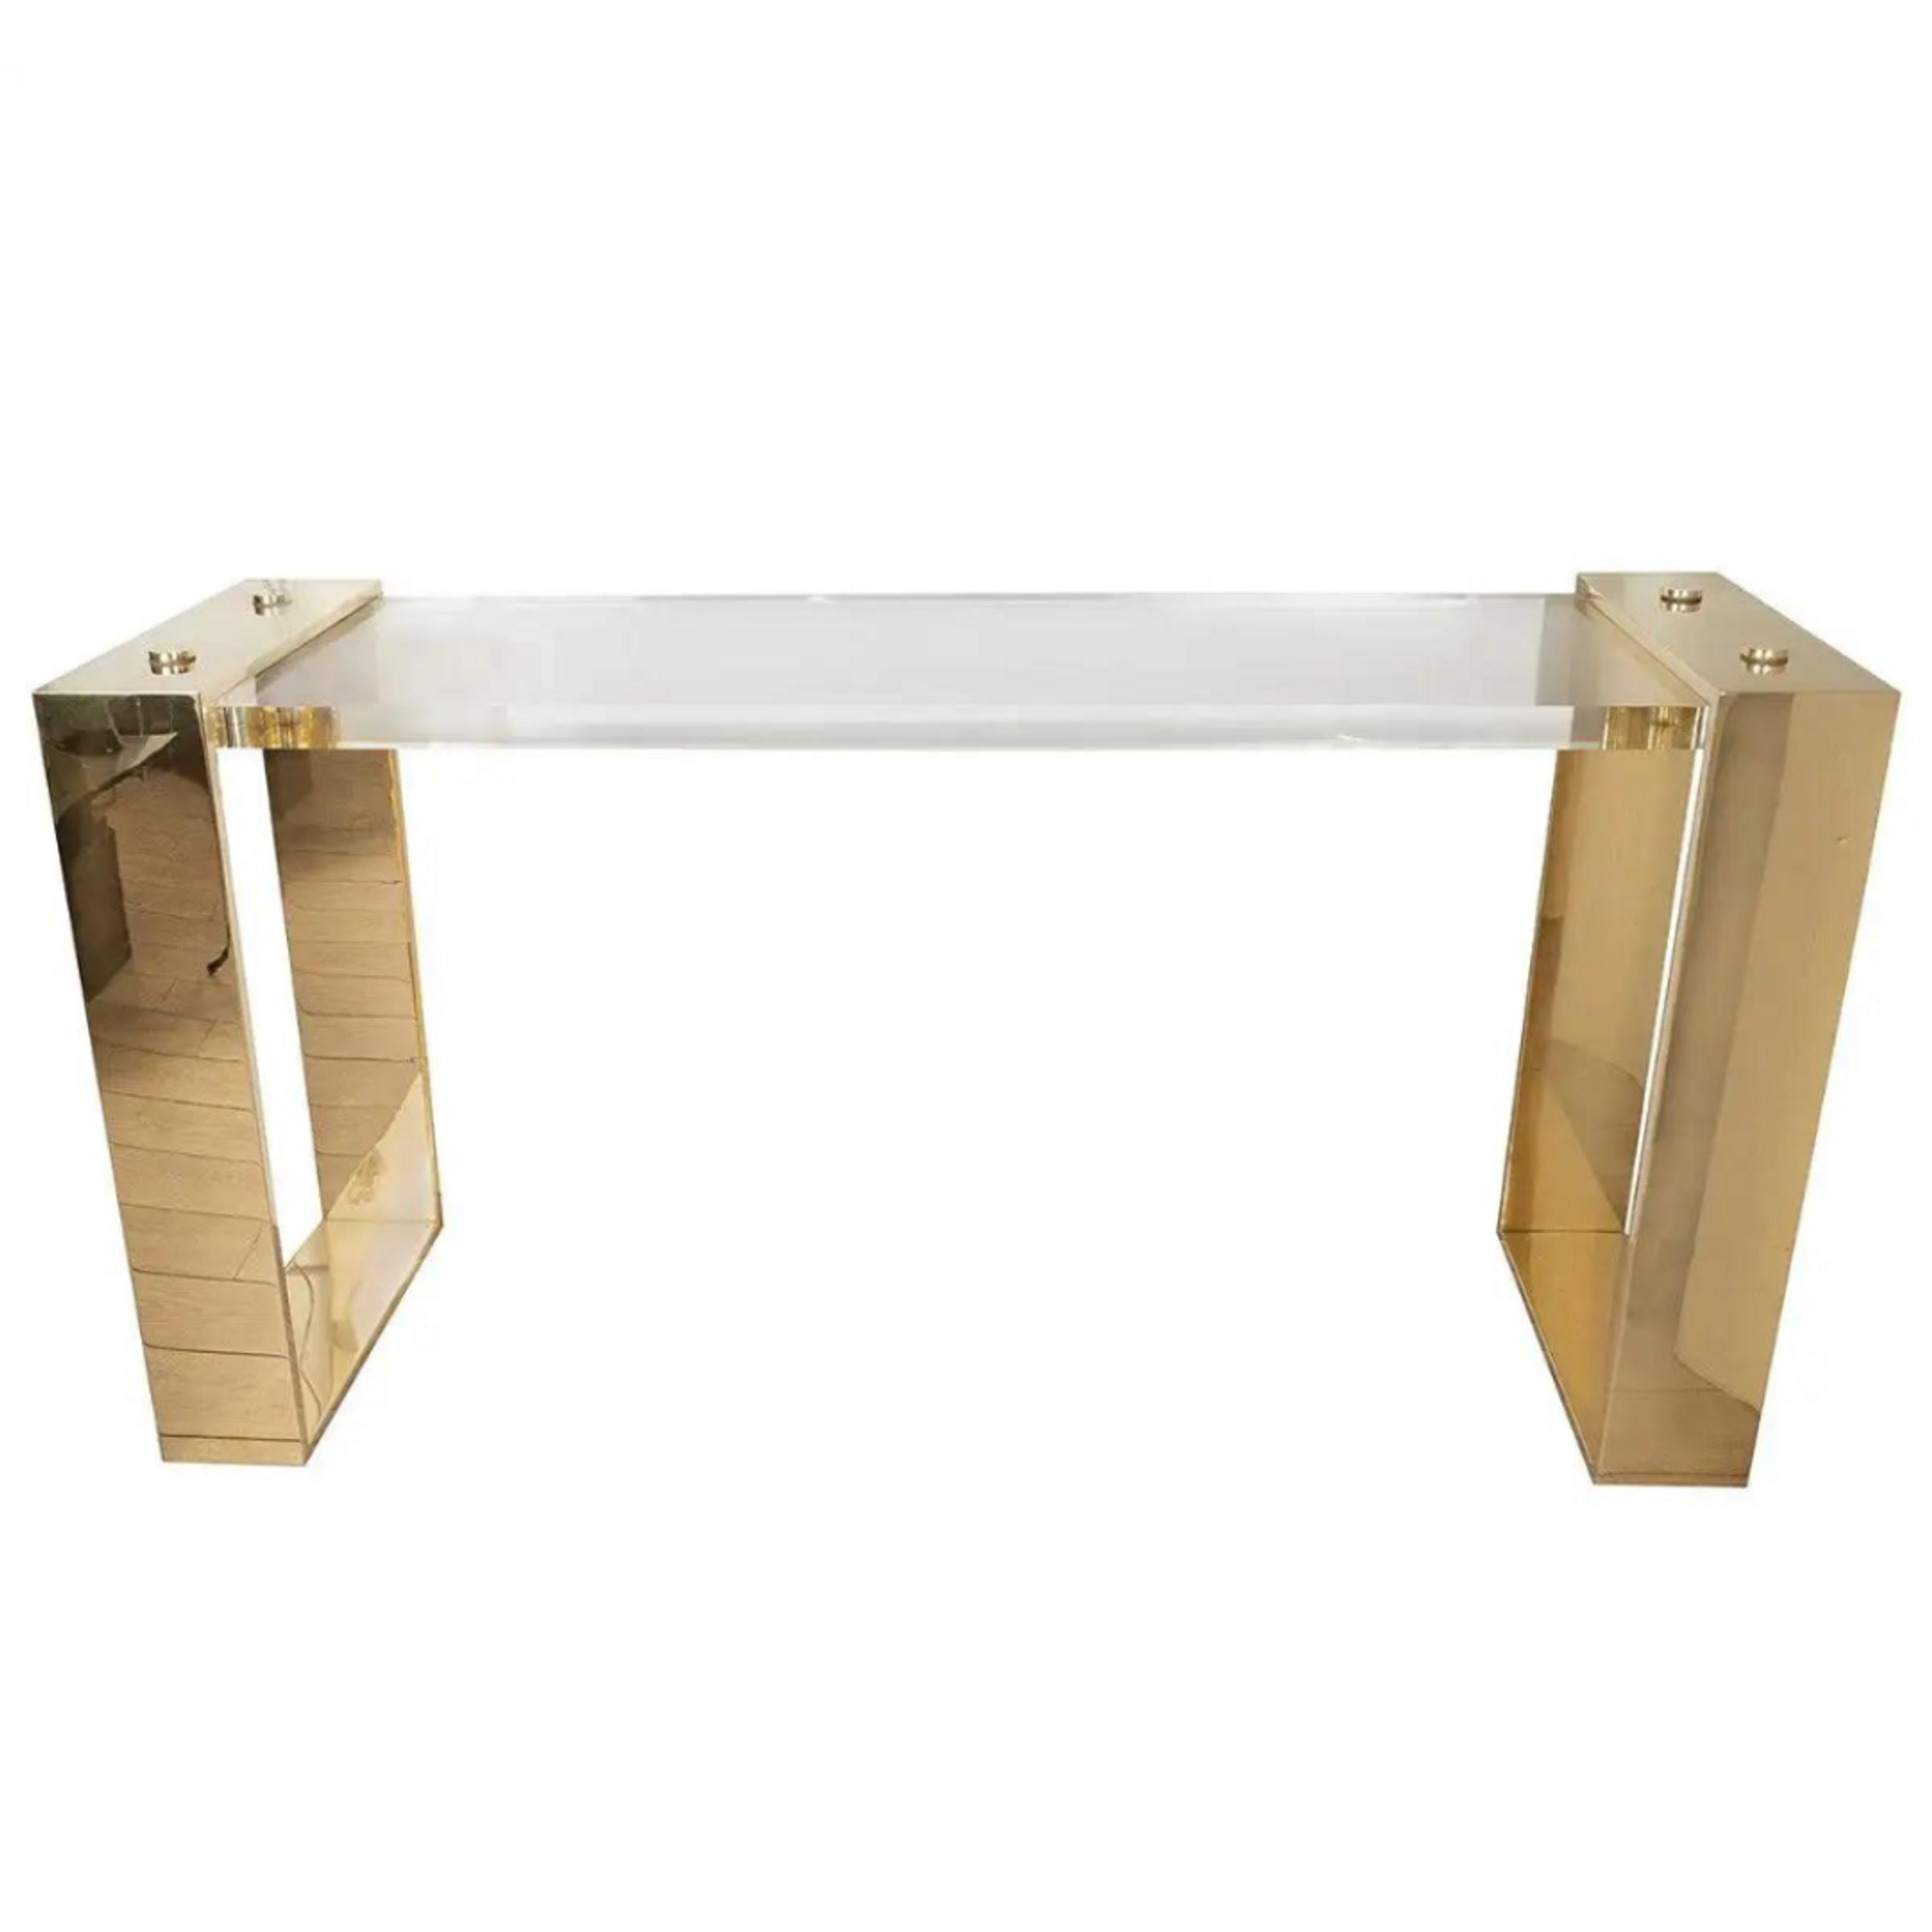 brass lucite coffee table, lucite rectangle coffee table, modern brass lucite cocktail table